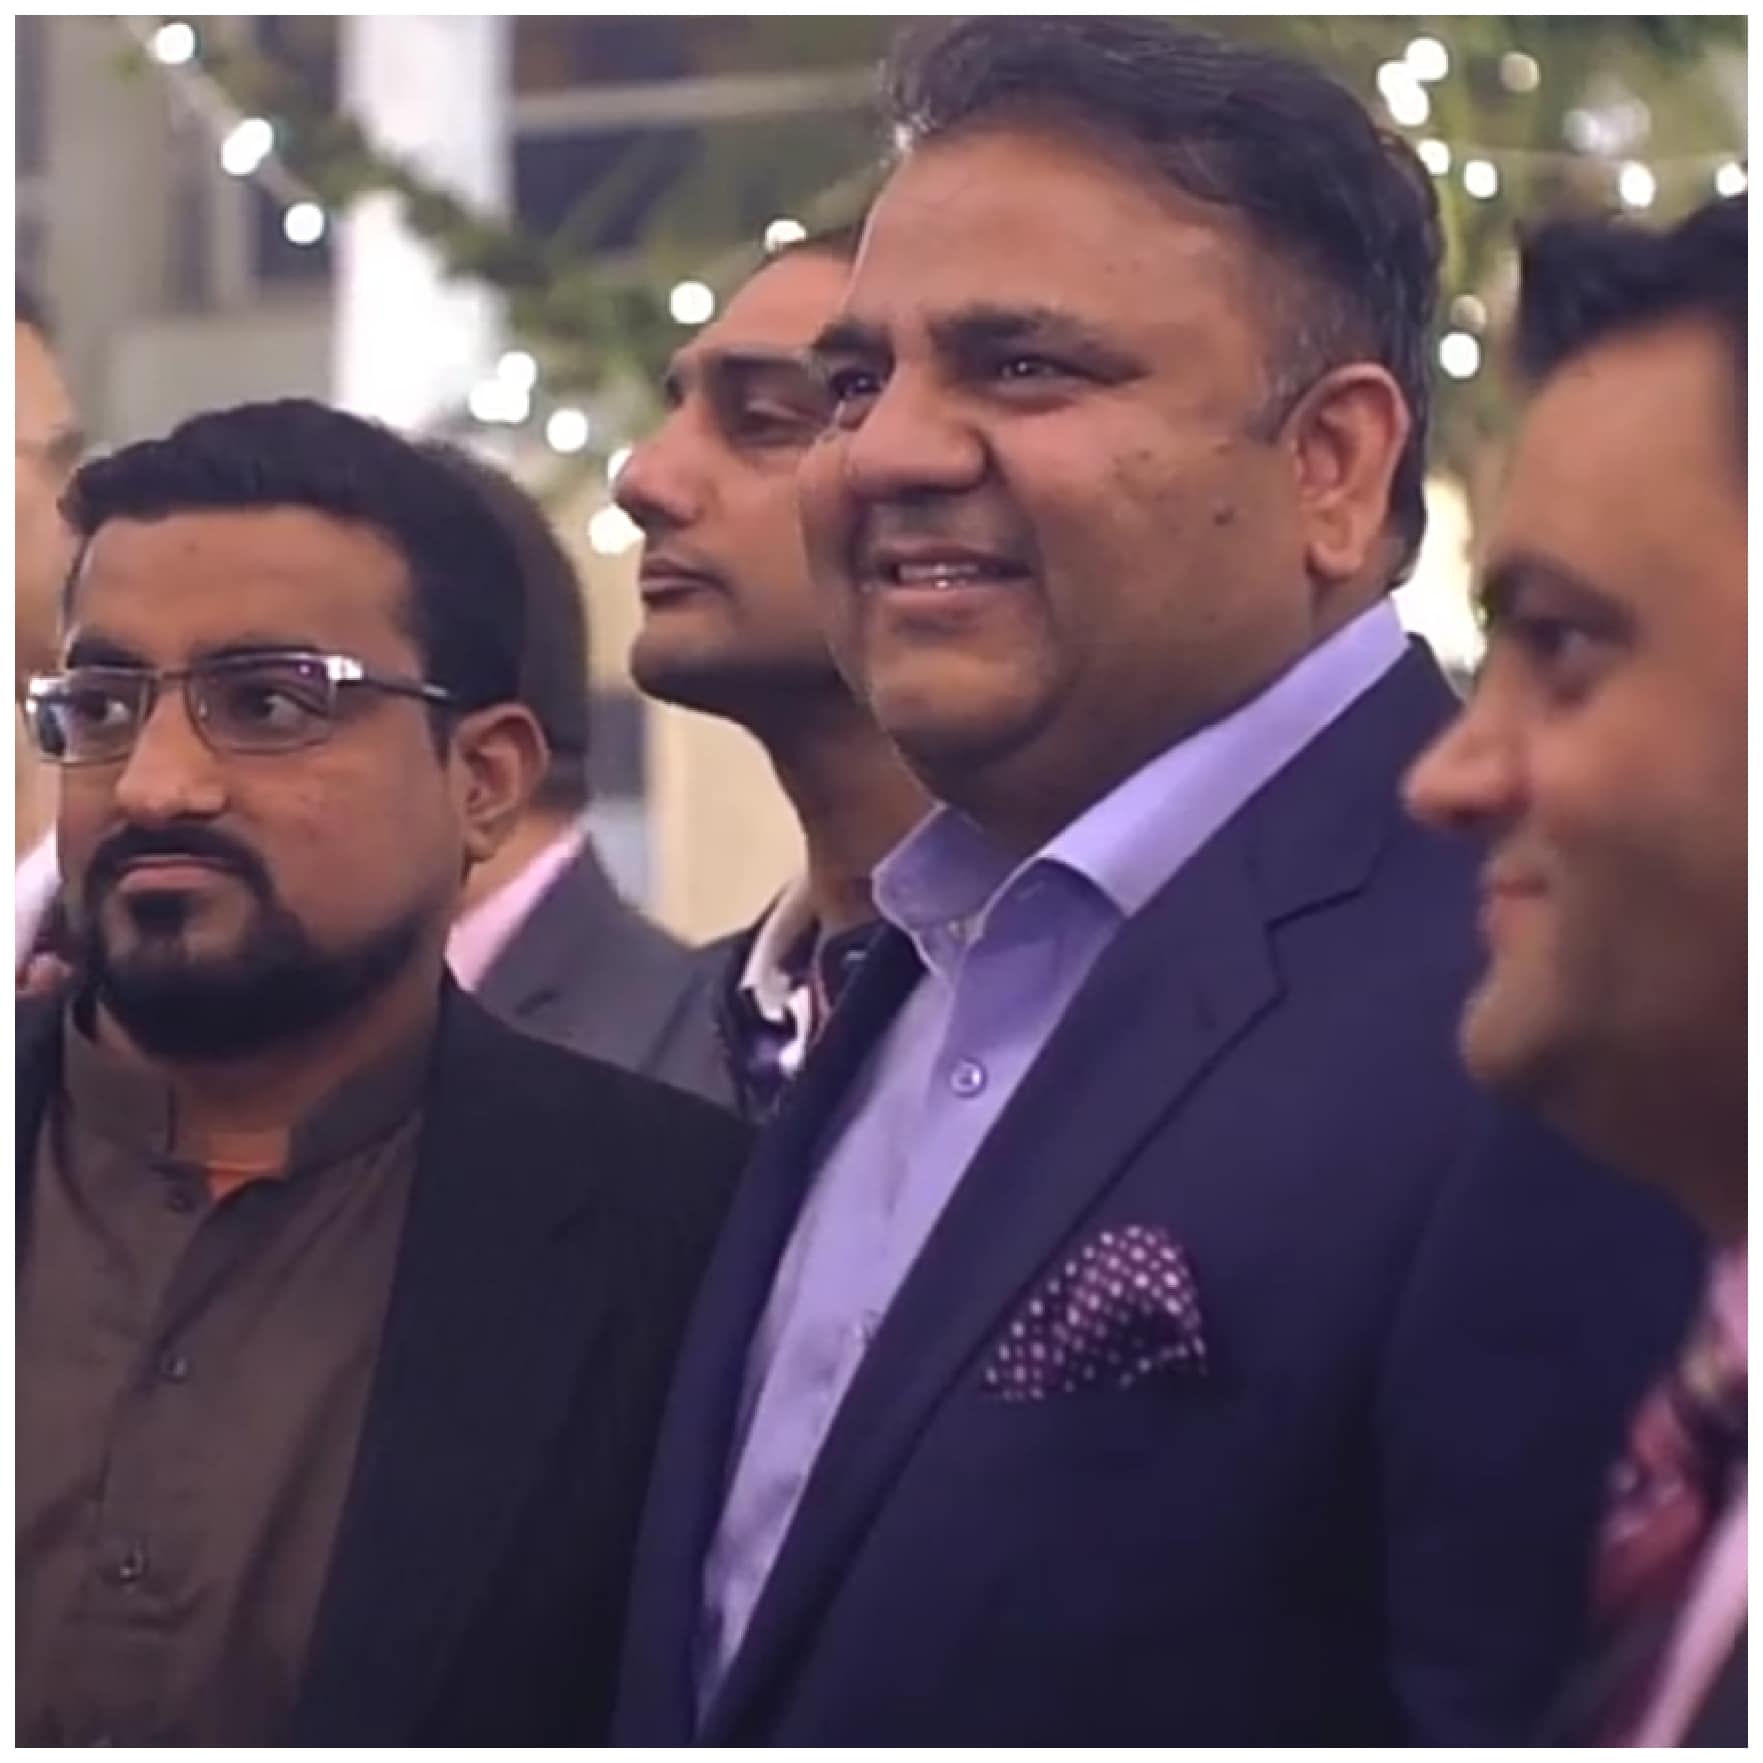 Exclusive Wedding Pictures Of Asad Umar Son Asif Umar And Qirat Asif